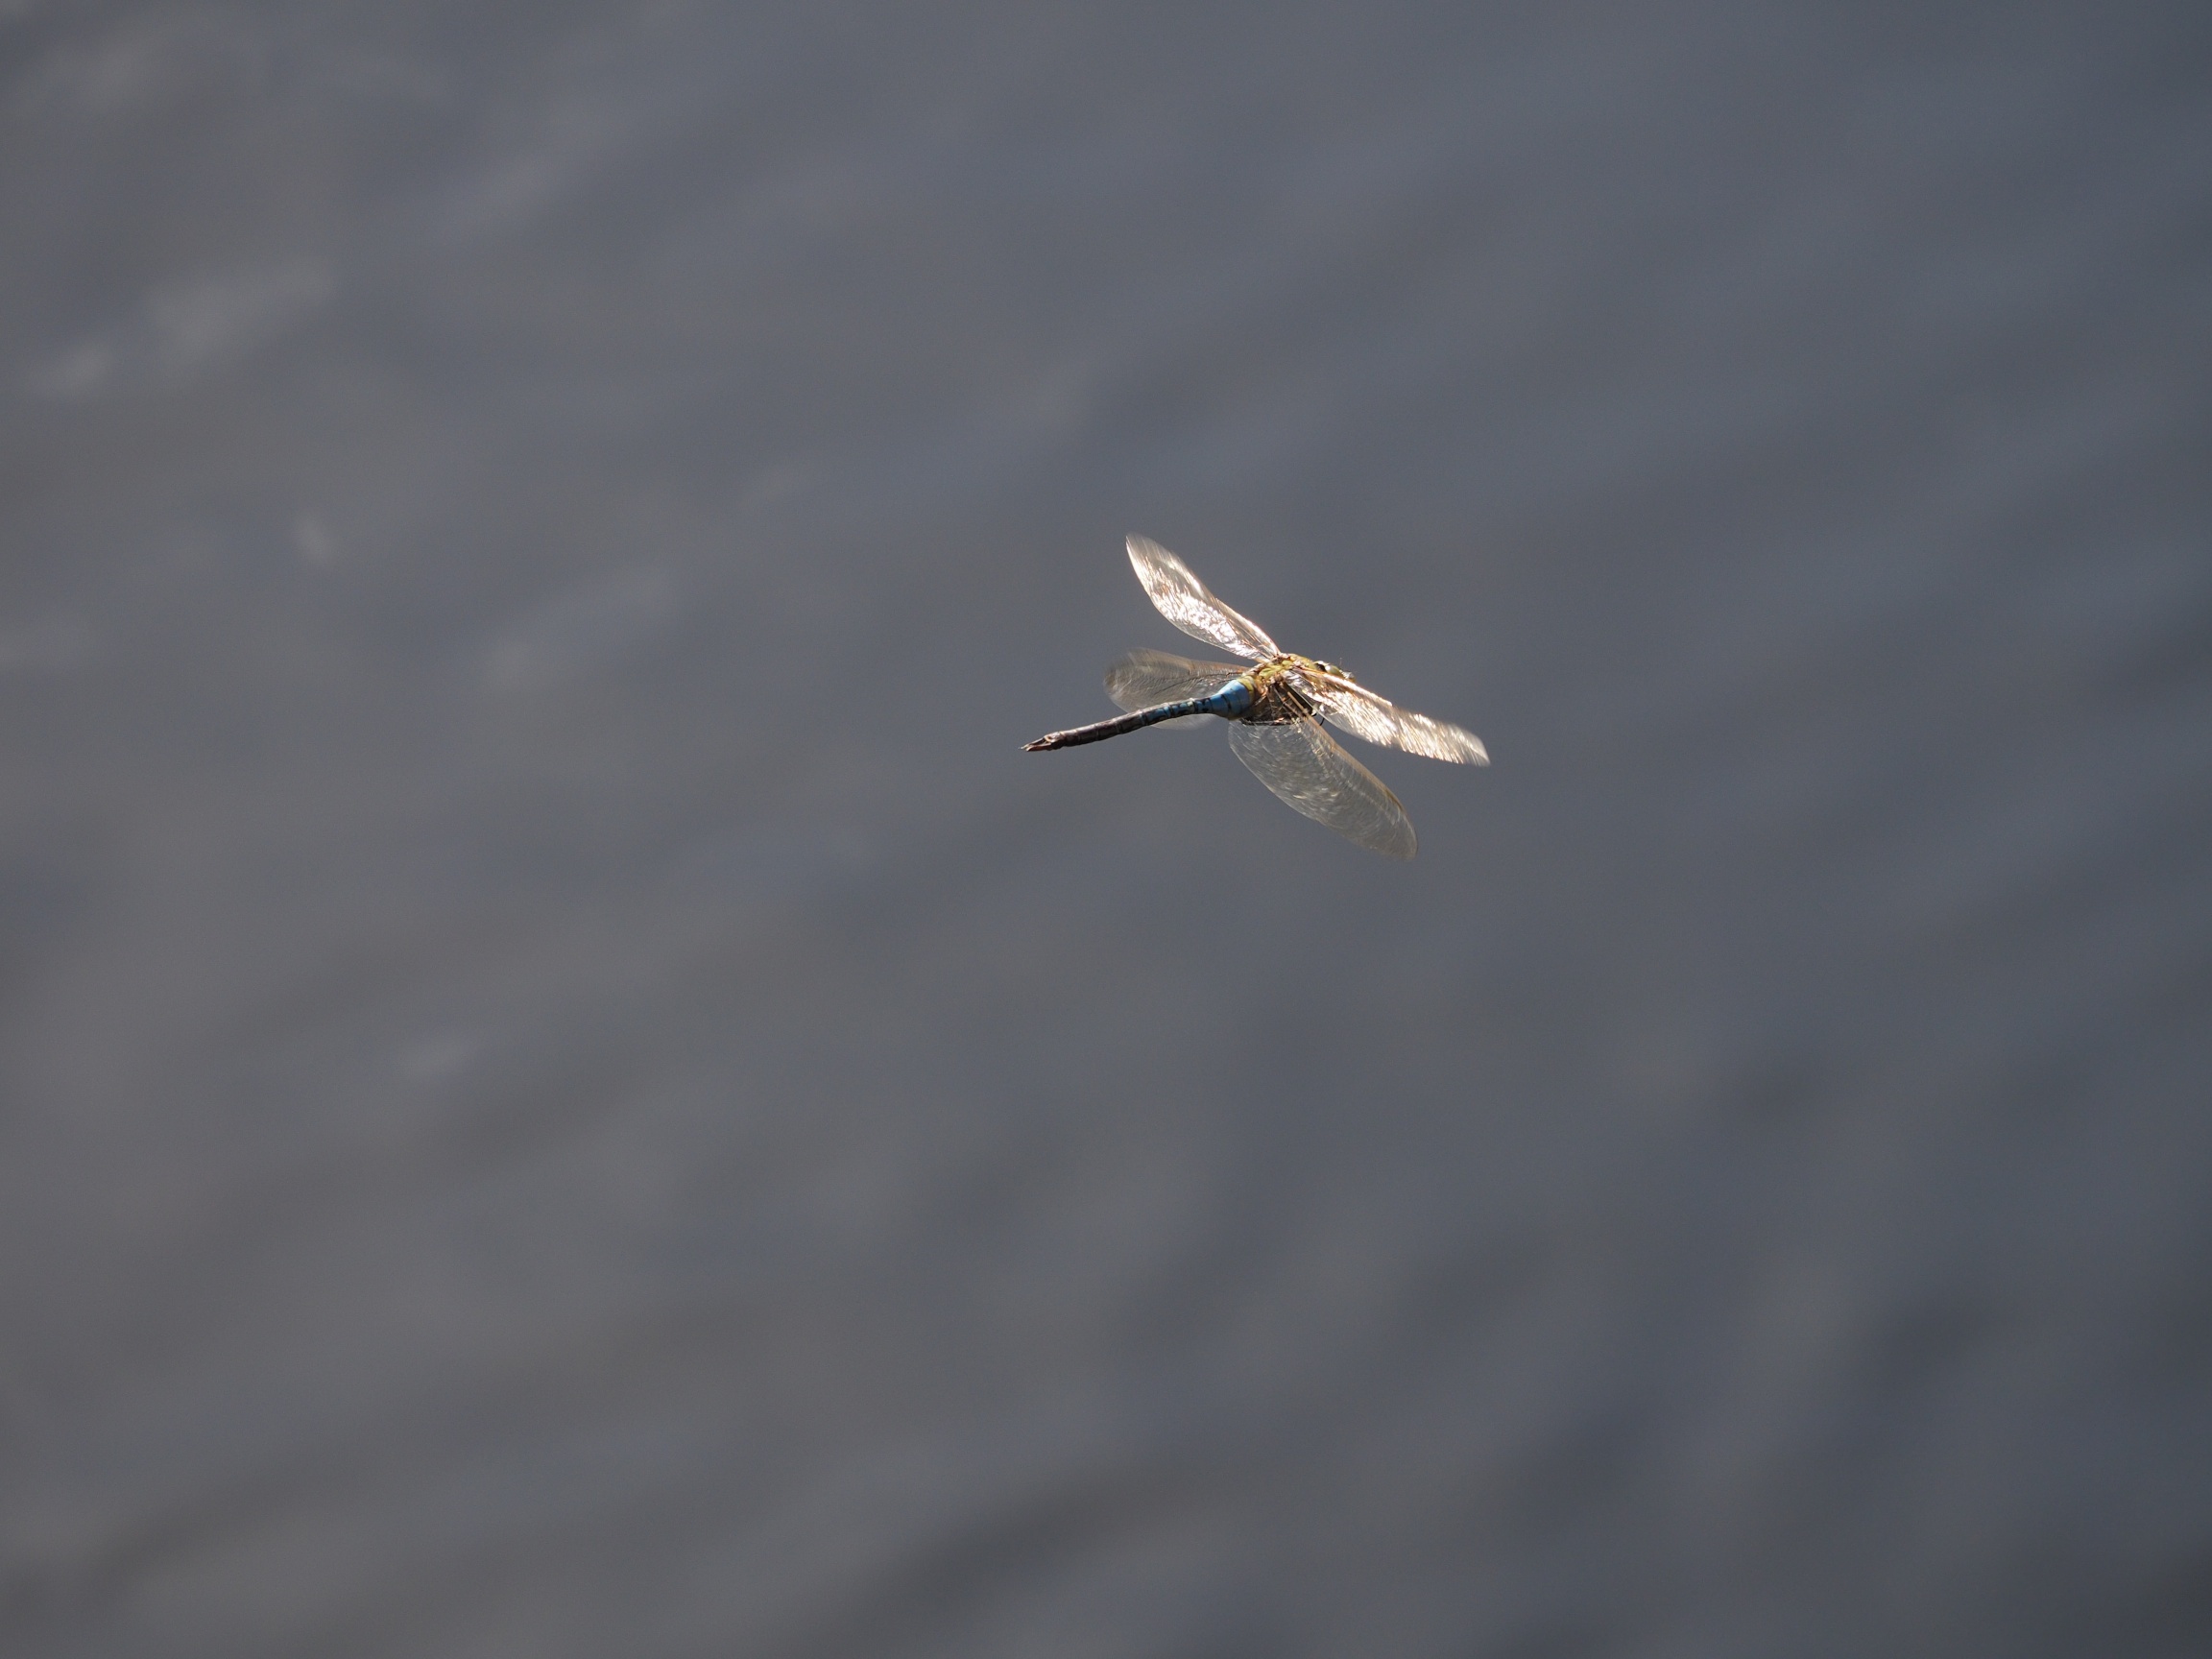 Dragonfly in flight picture